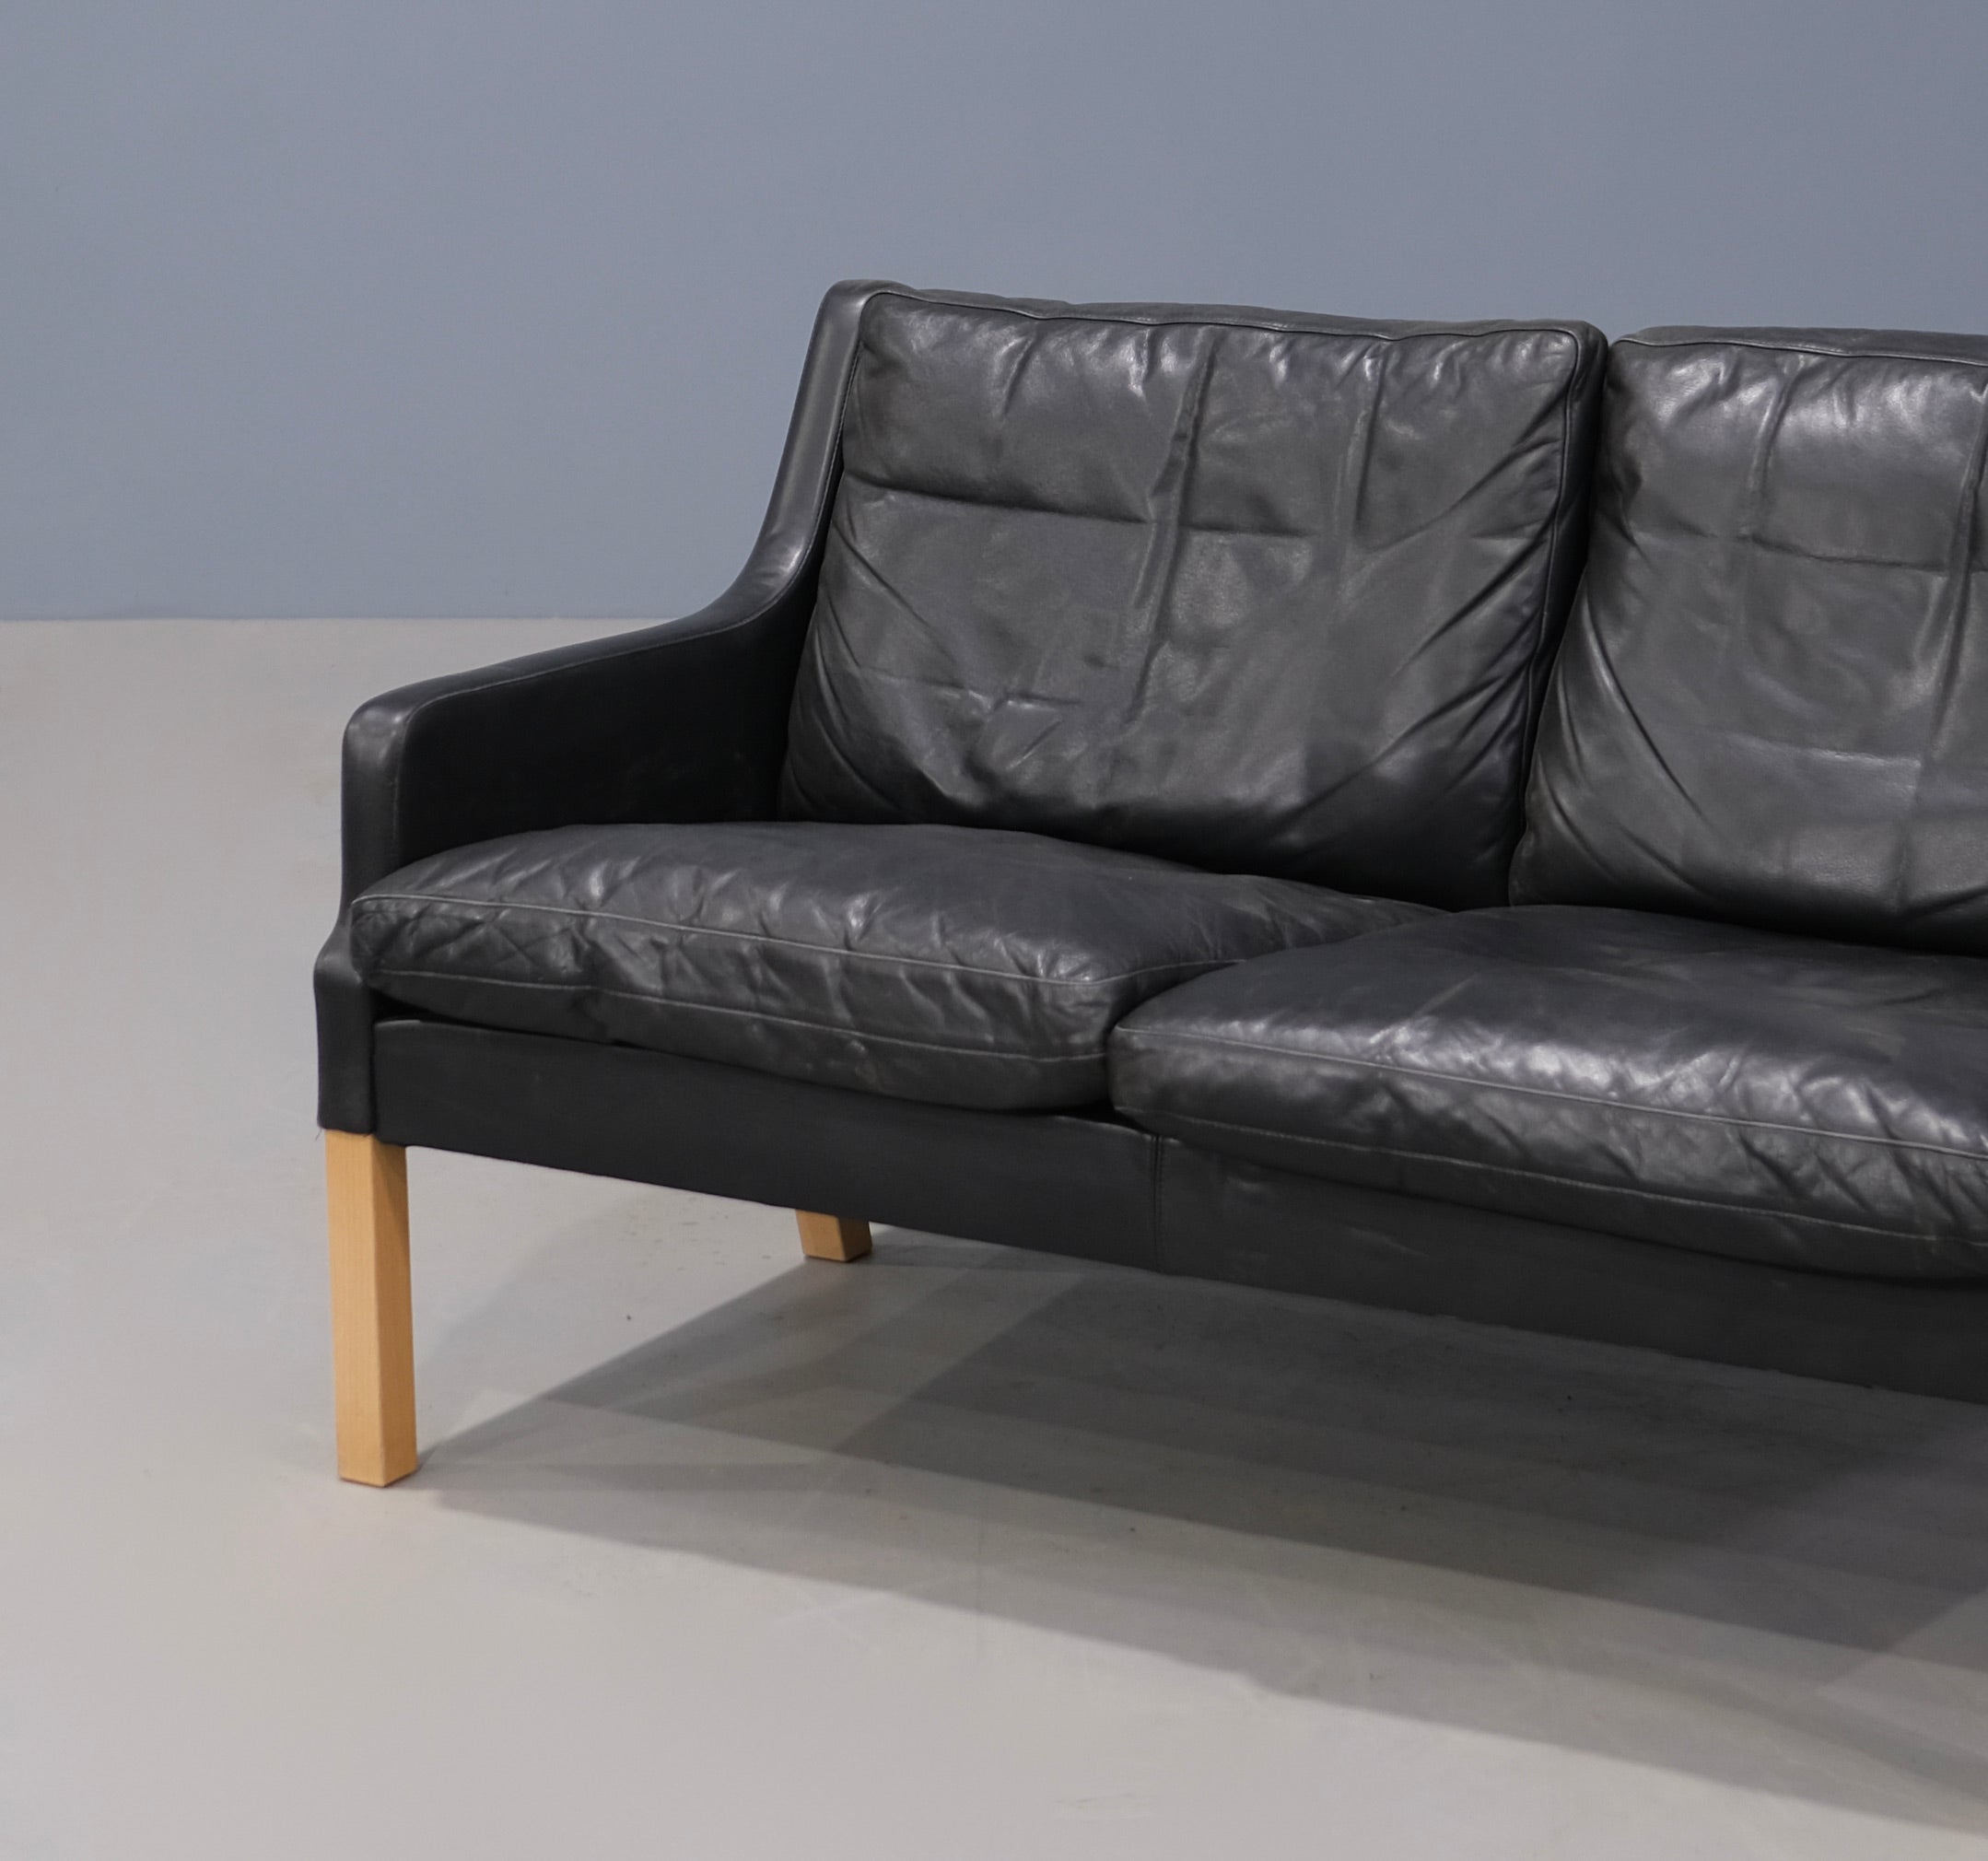 Danish Two Seater Sofa in Black Leather